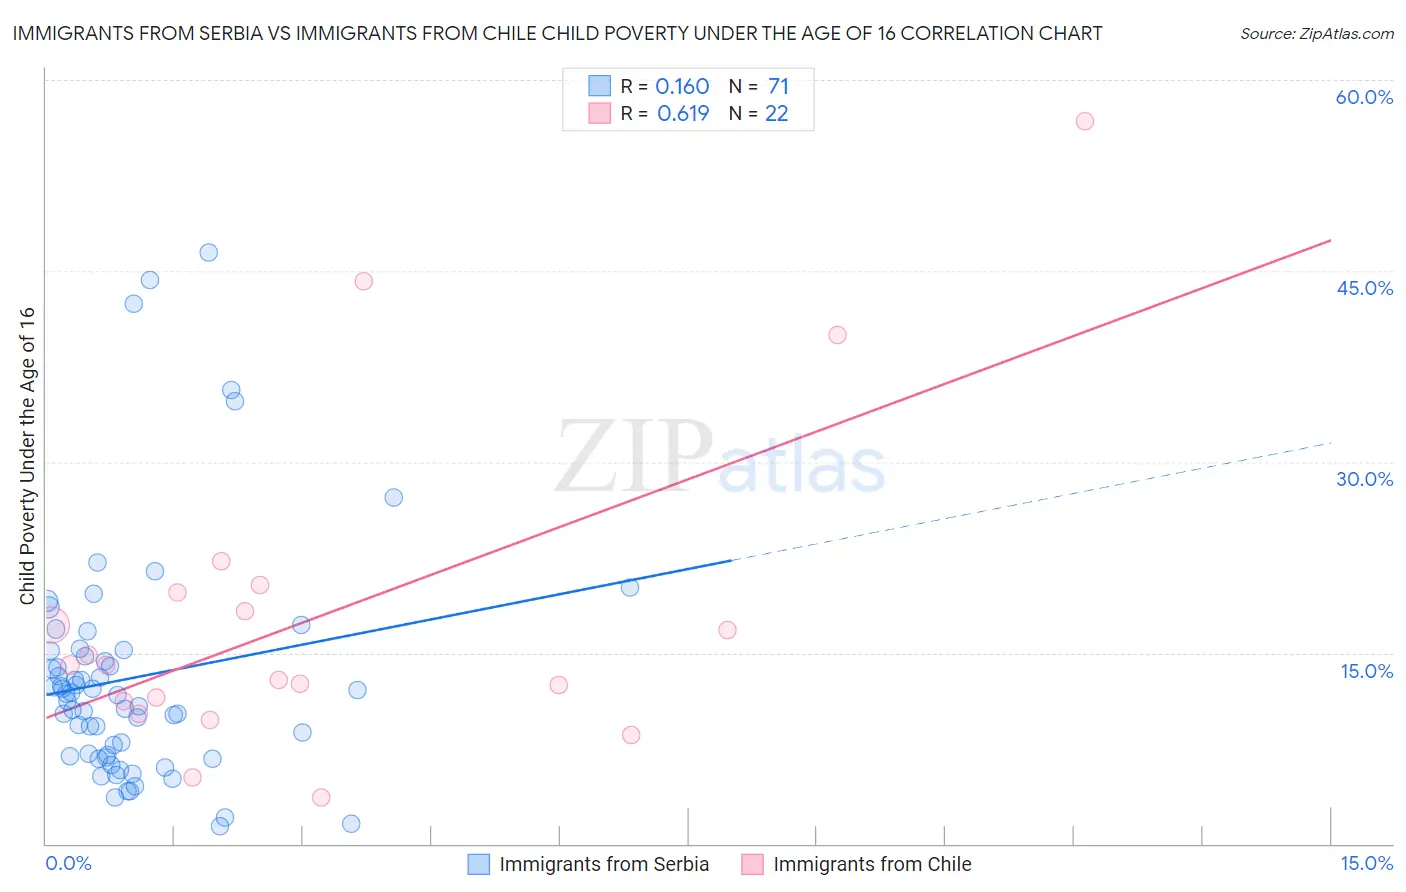 Immigrants from Serbia vs Immigrants from Chile Child Poverty Under the Age of 16